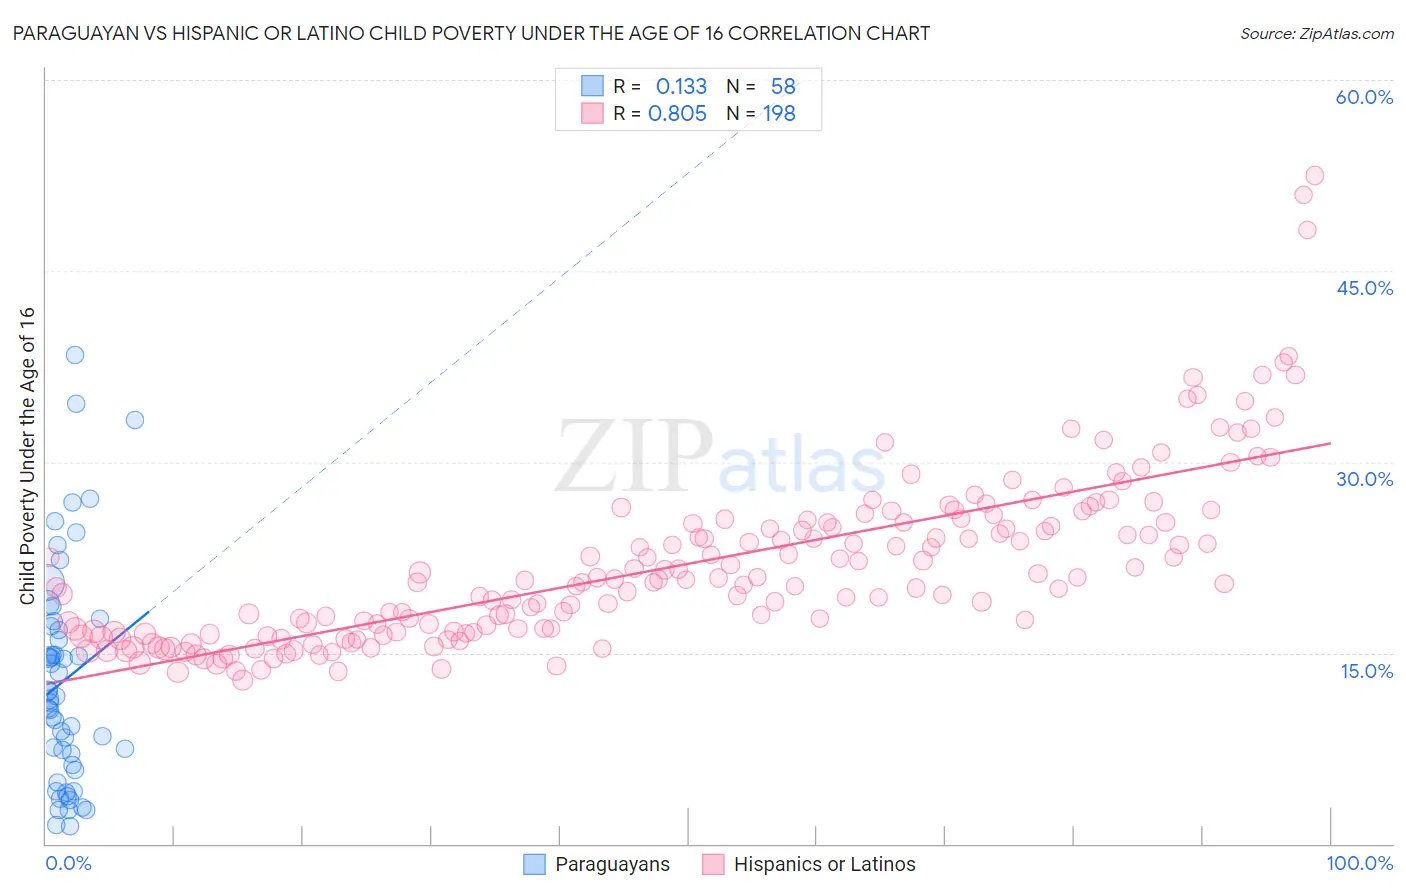 Paraguayan vs Hispanic or Latino Child Poverty Under the Age of 16